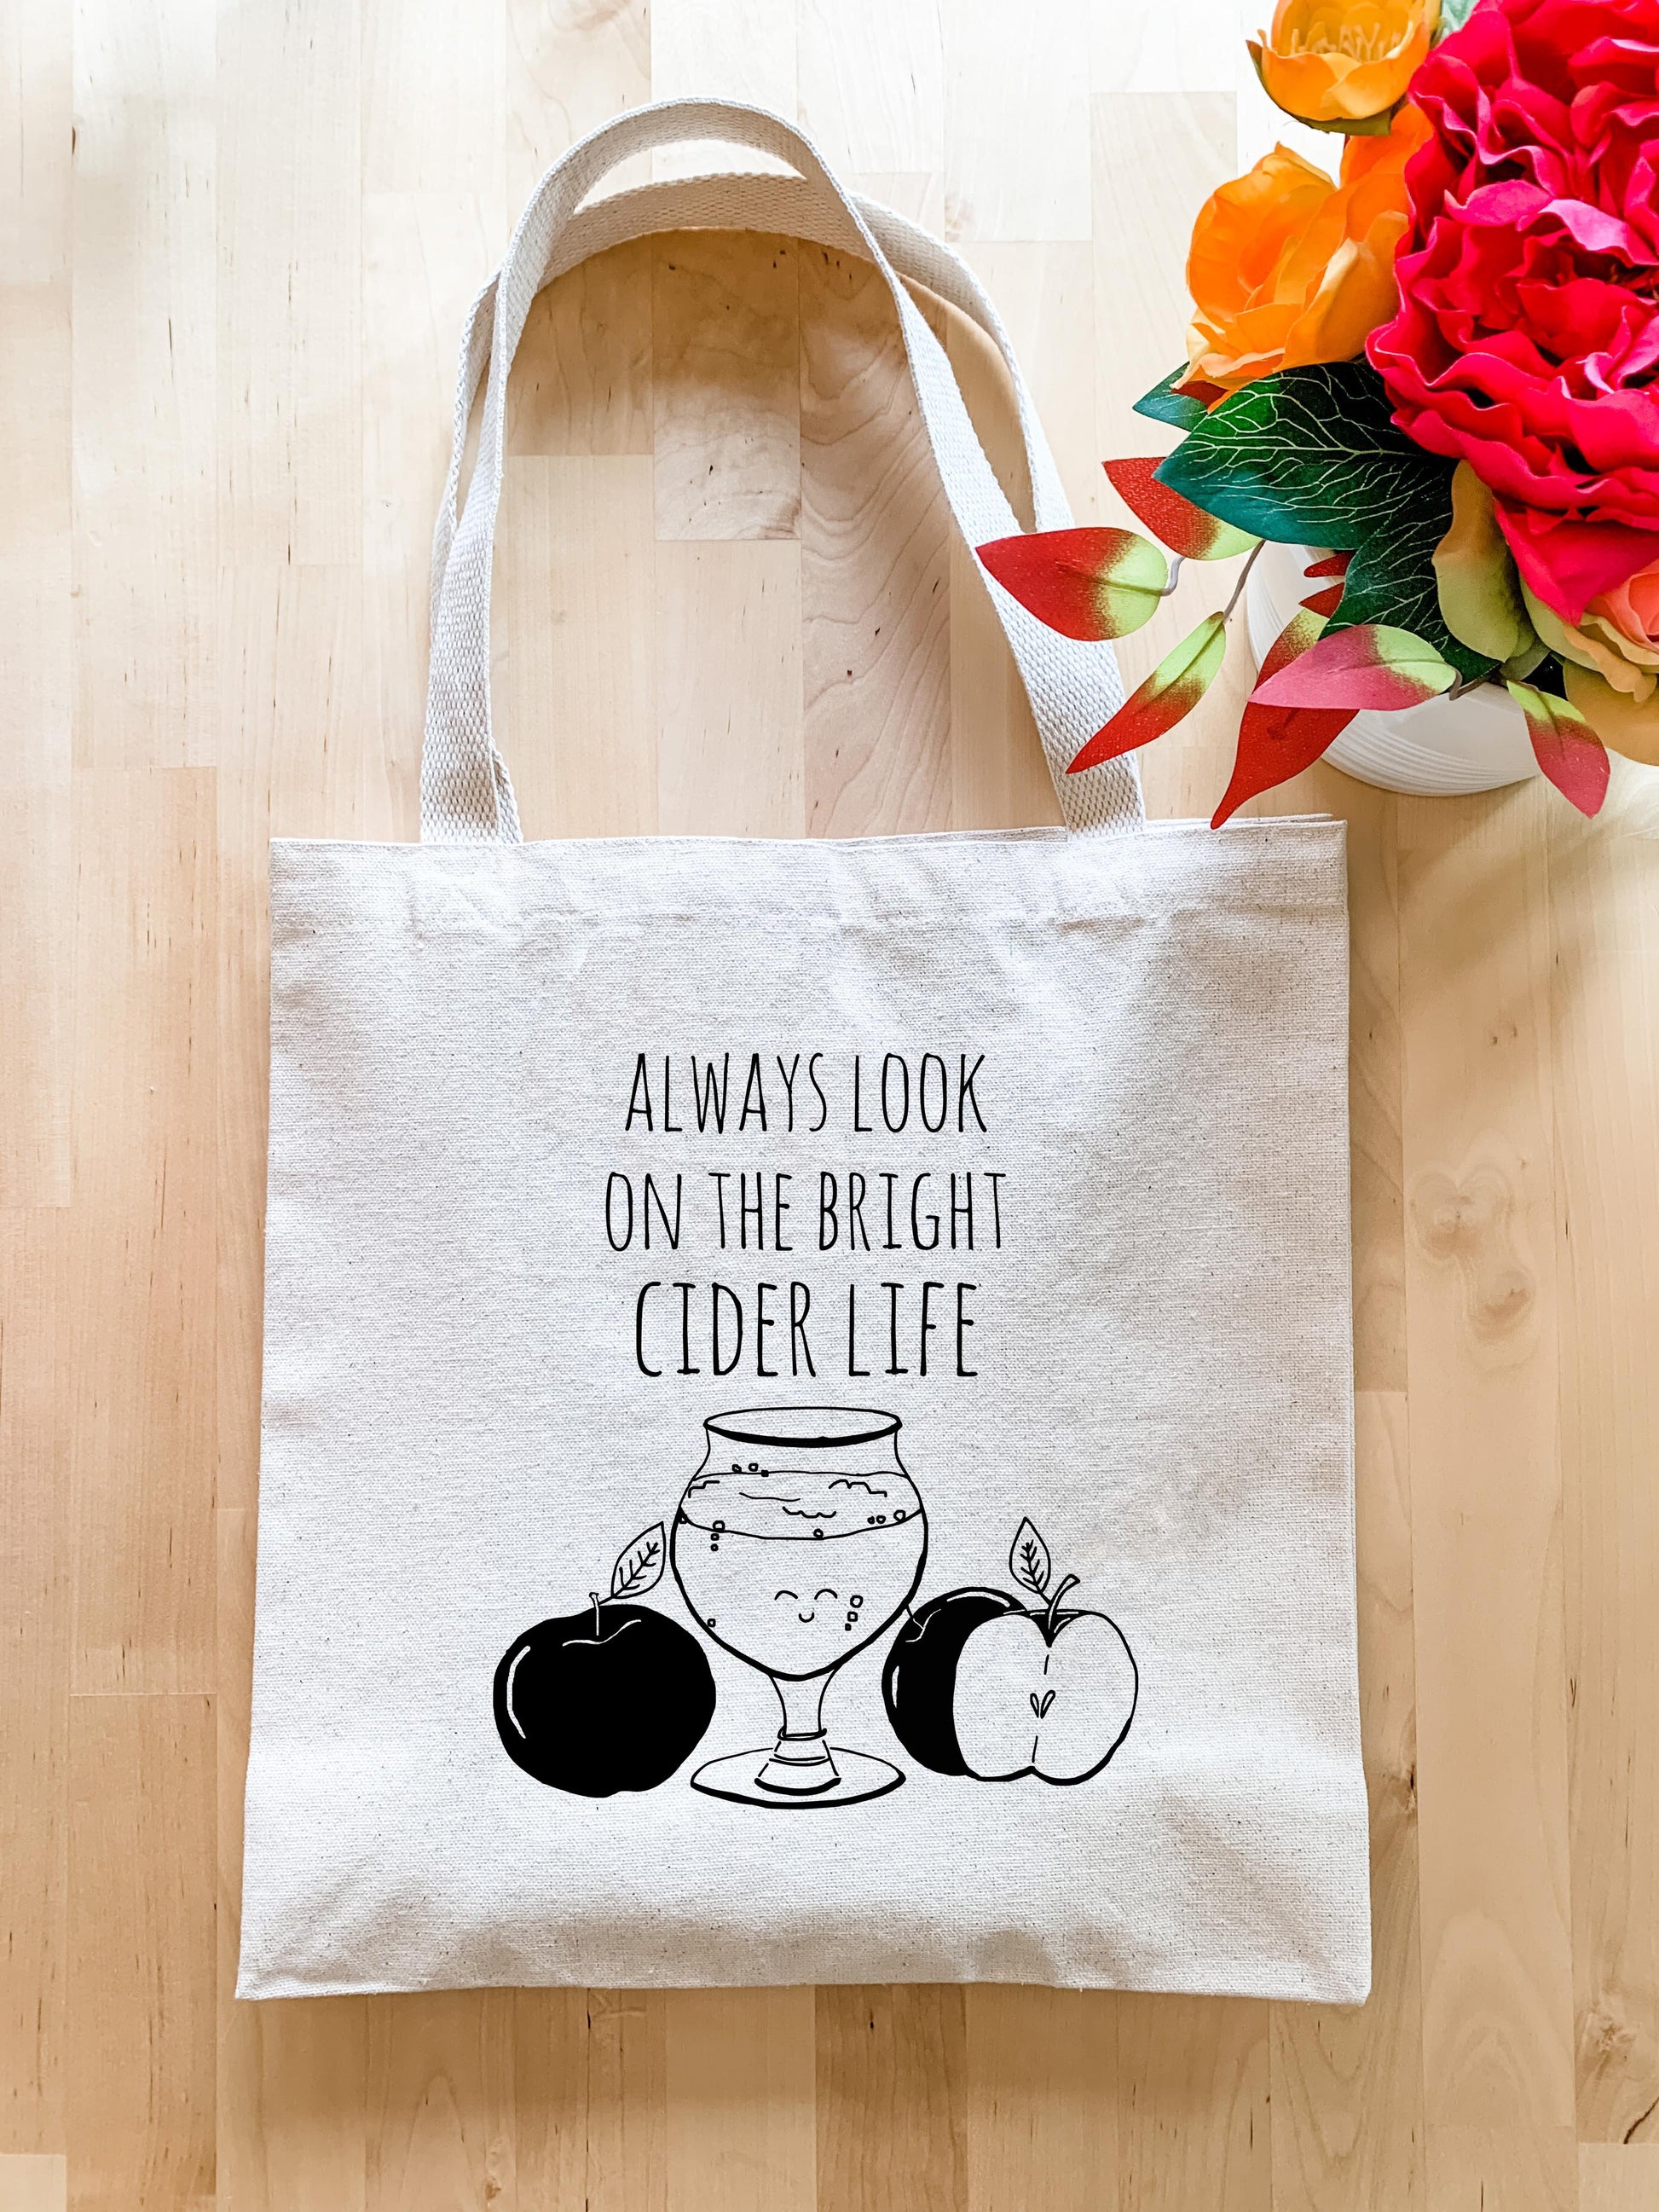 Always Look on the Bright Cider Life - Tote Bag - MoonlightMakers